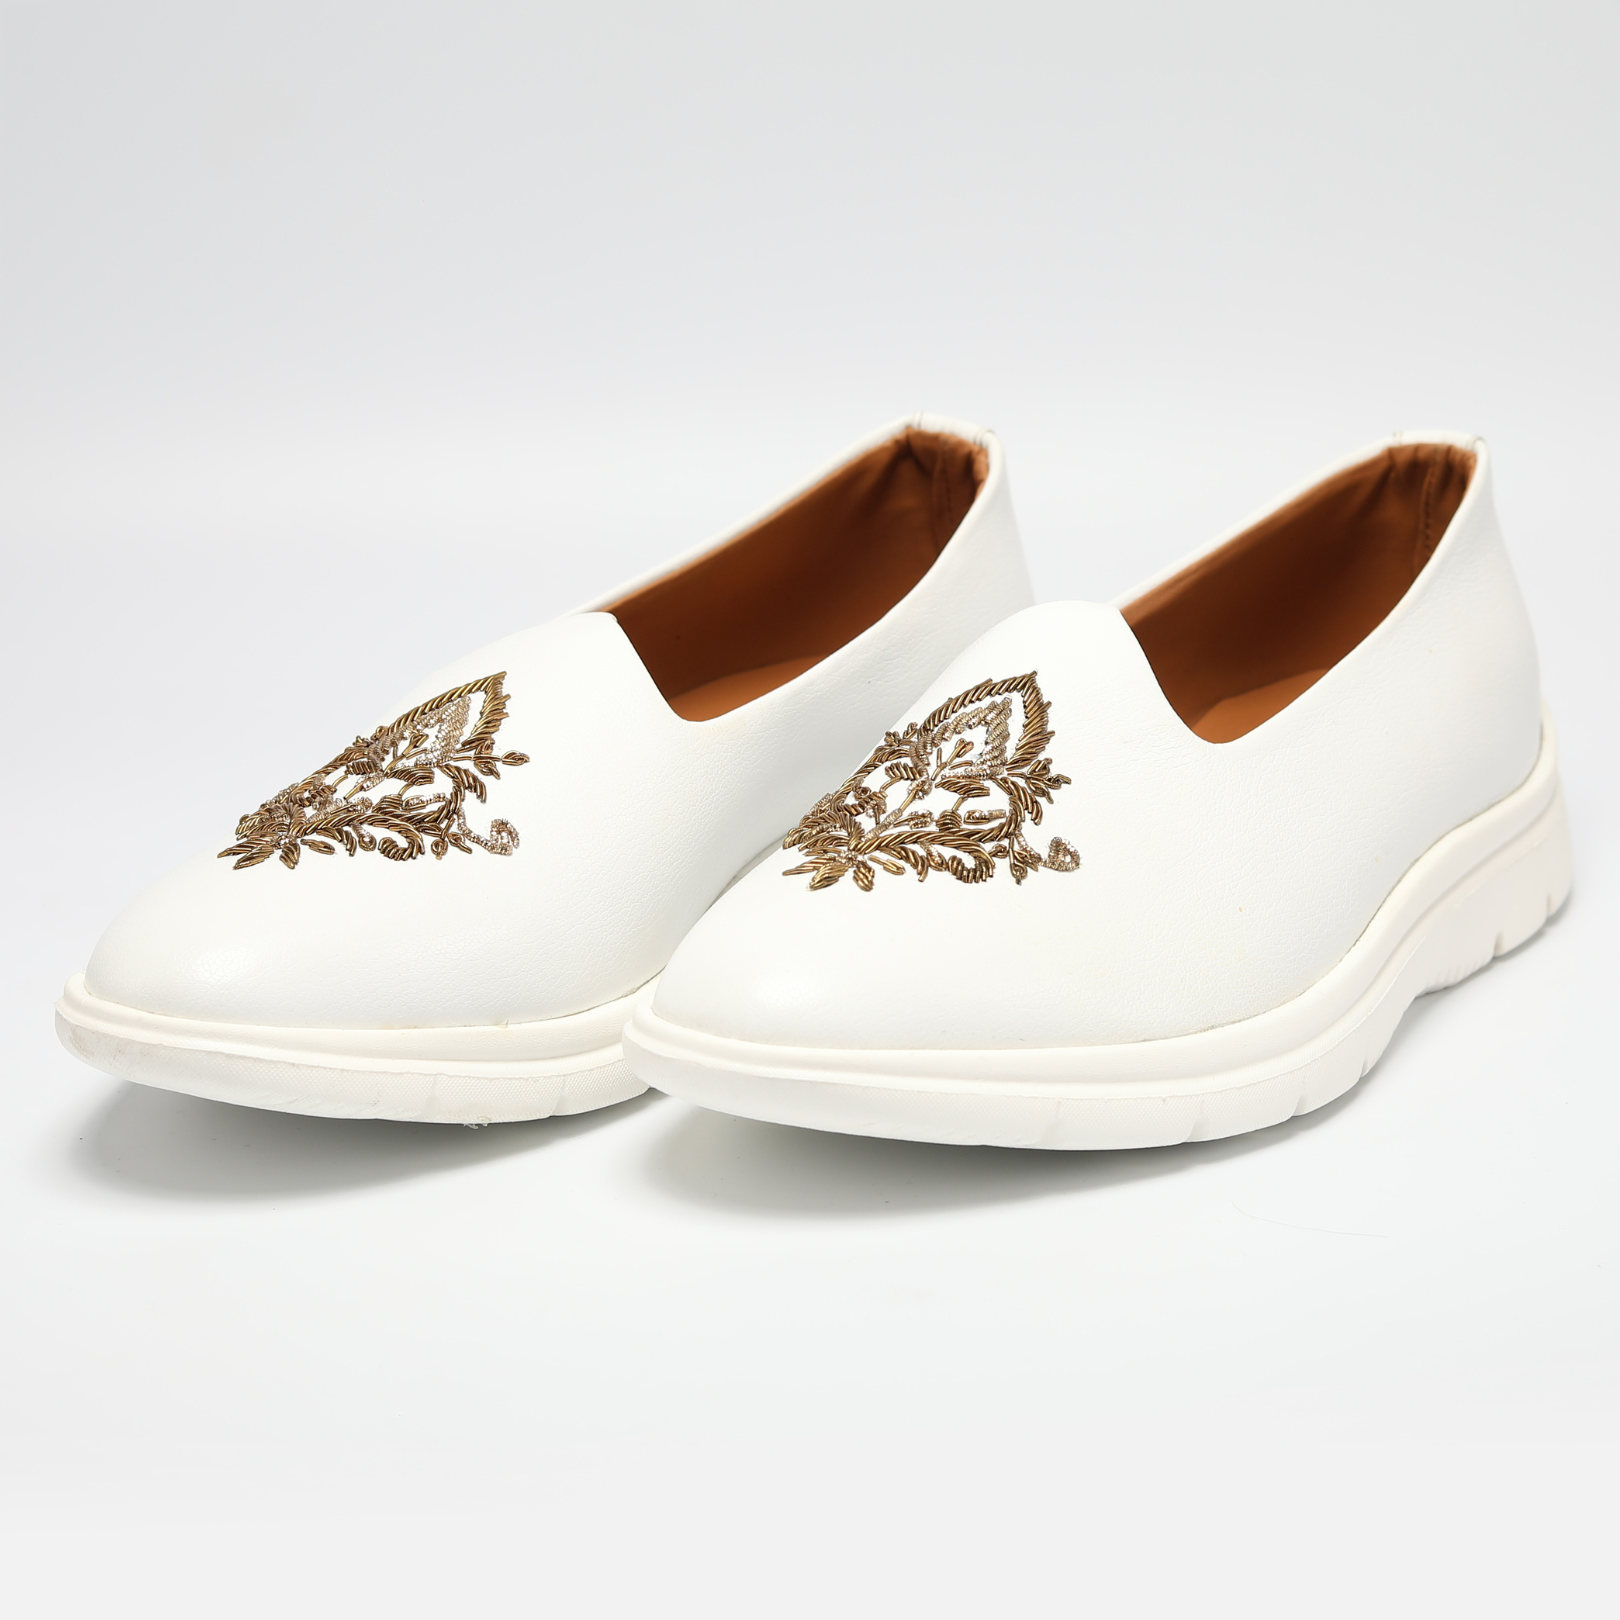 A white slip-on ReMx Mojari shoe with a gold embroidered design from Monkstory.